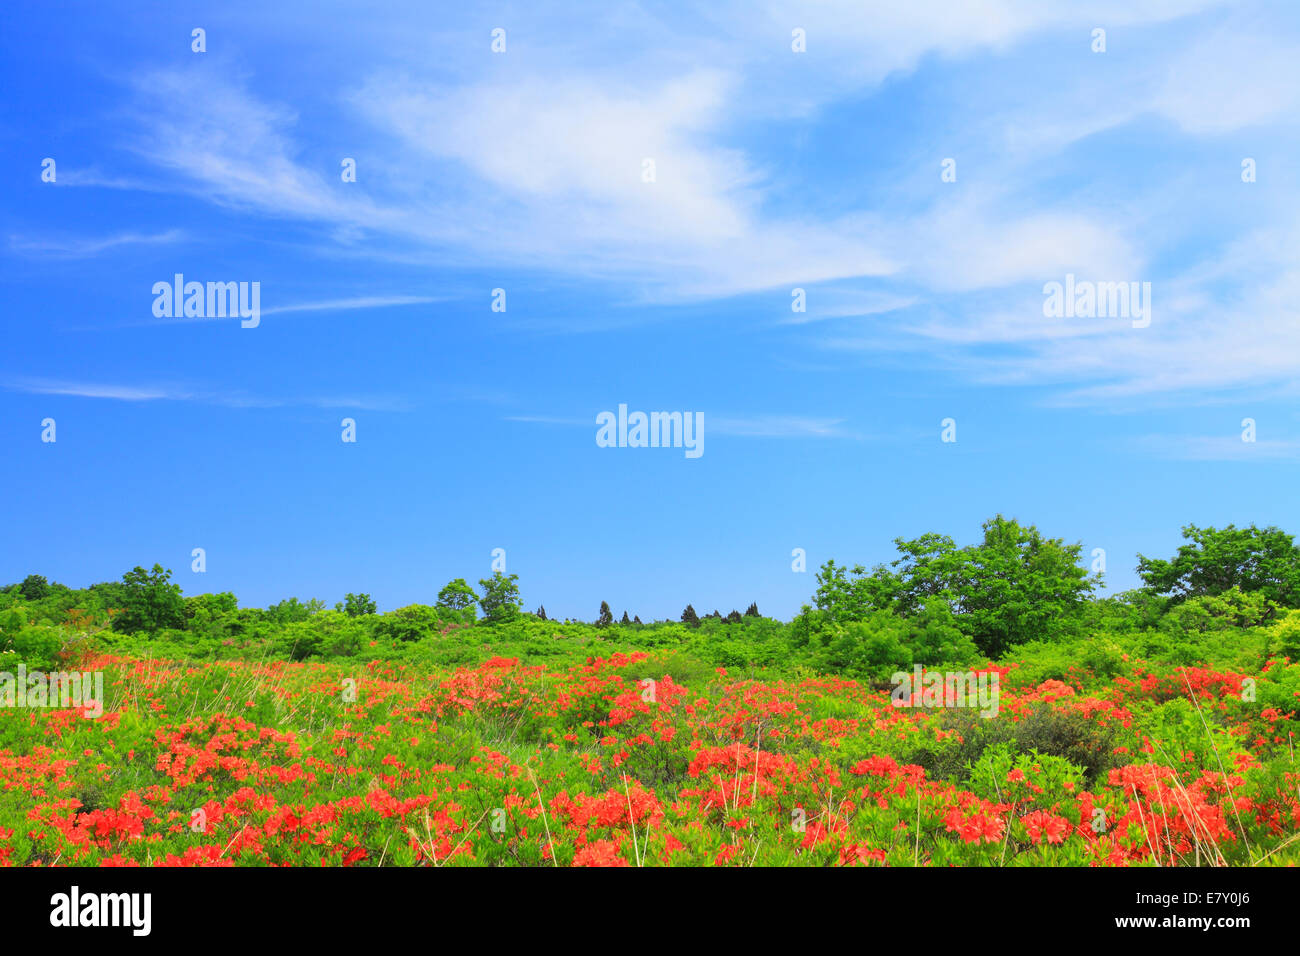 Rhododendron field Stock Photo